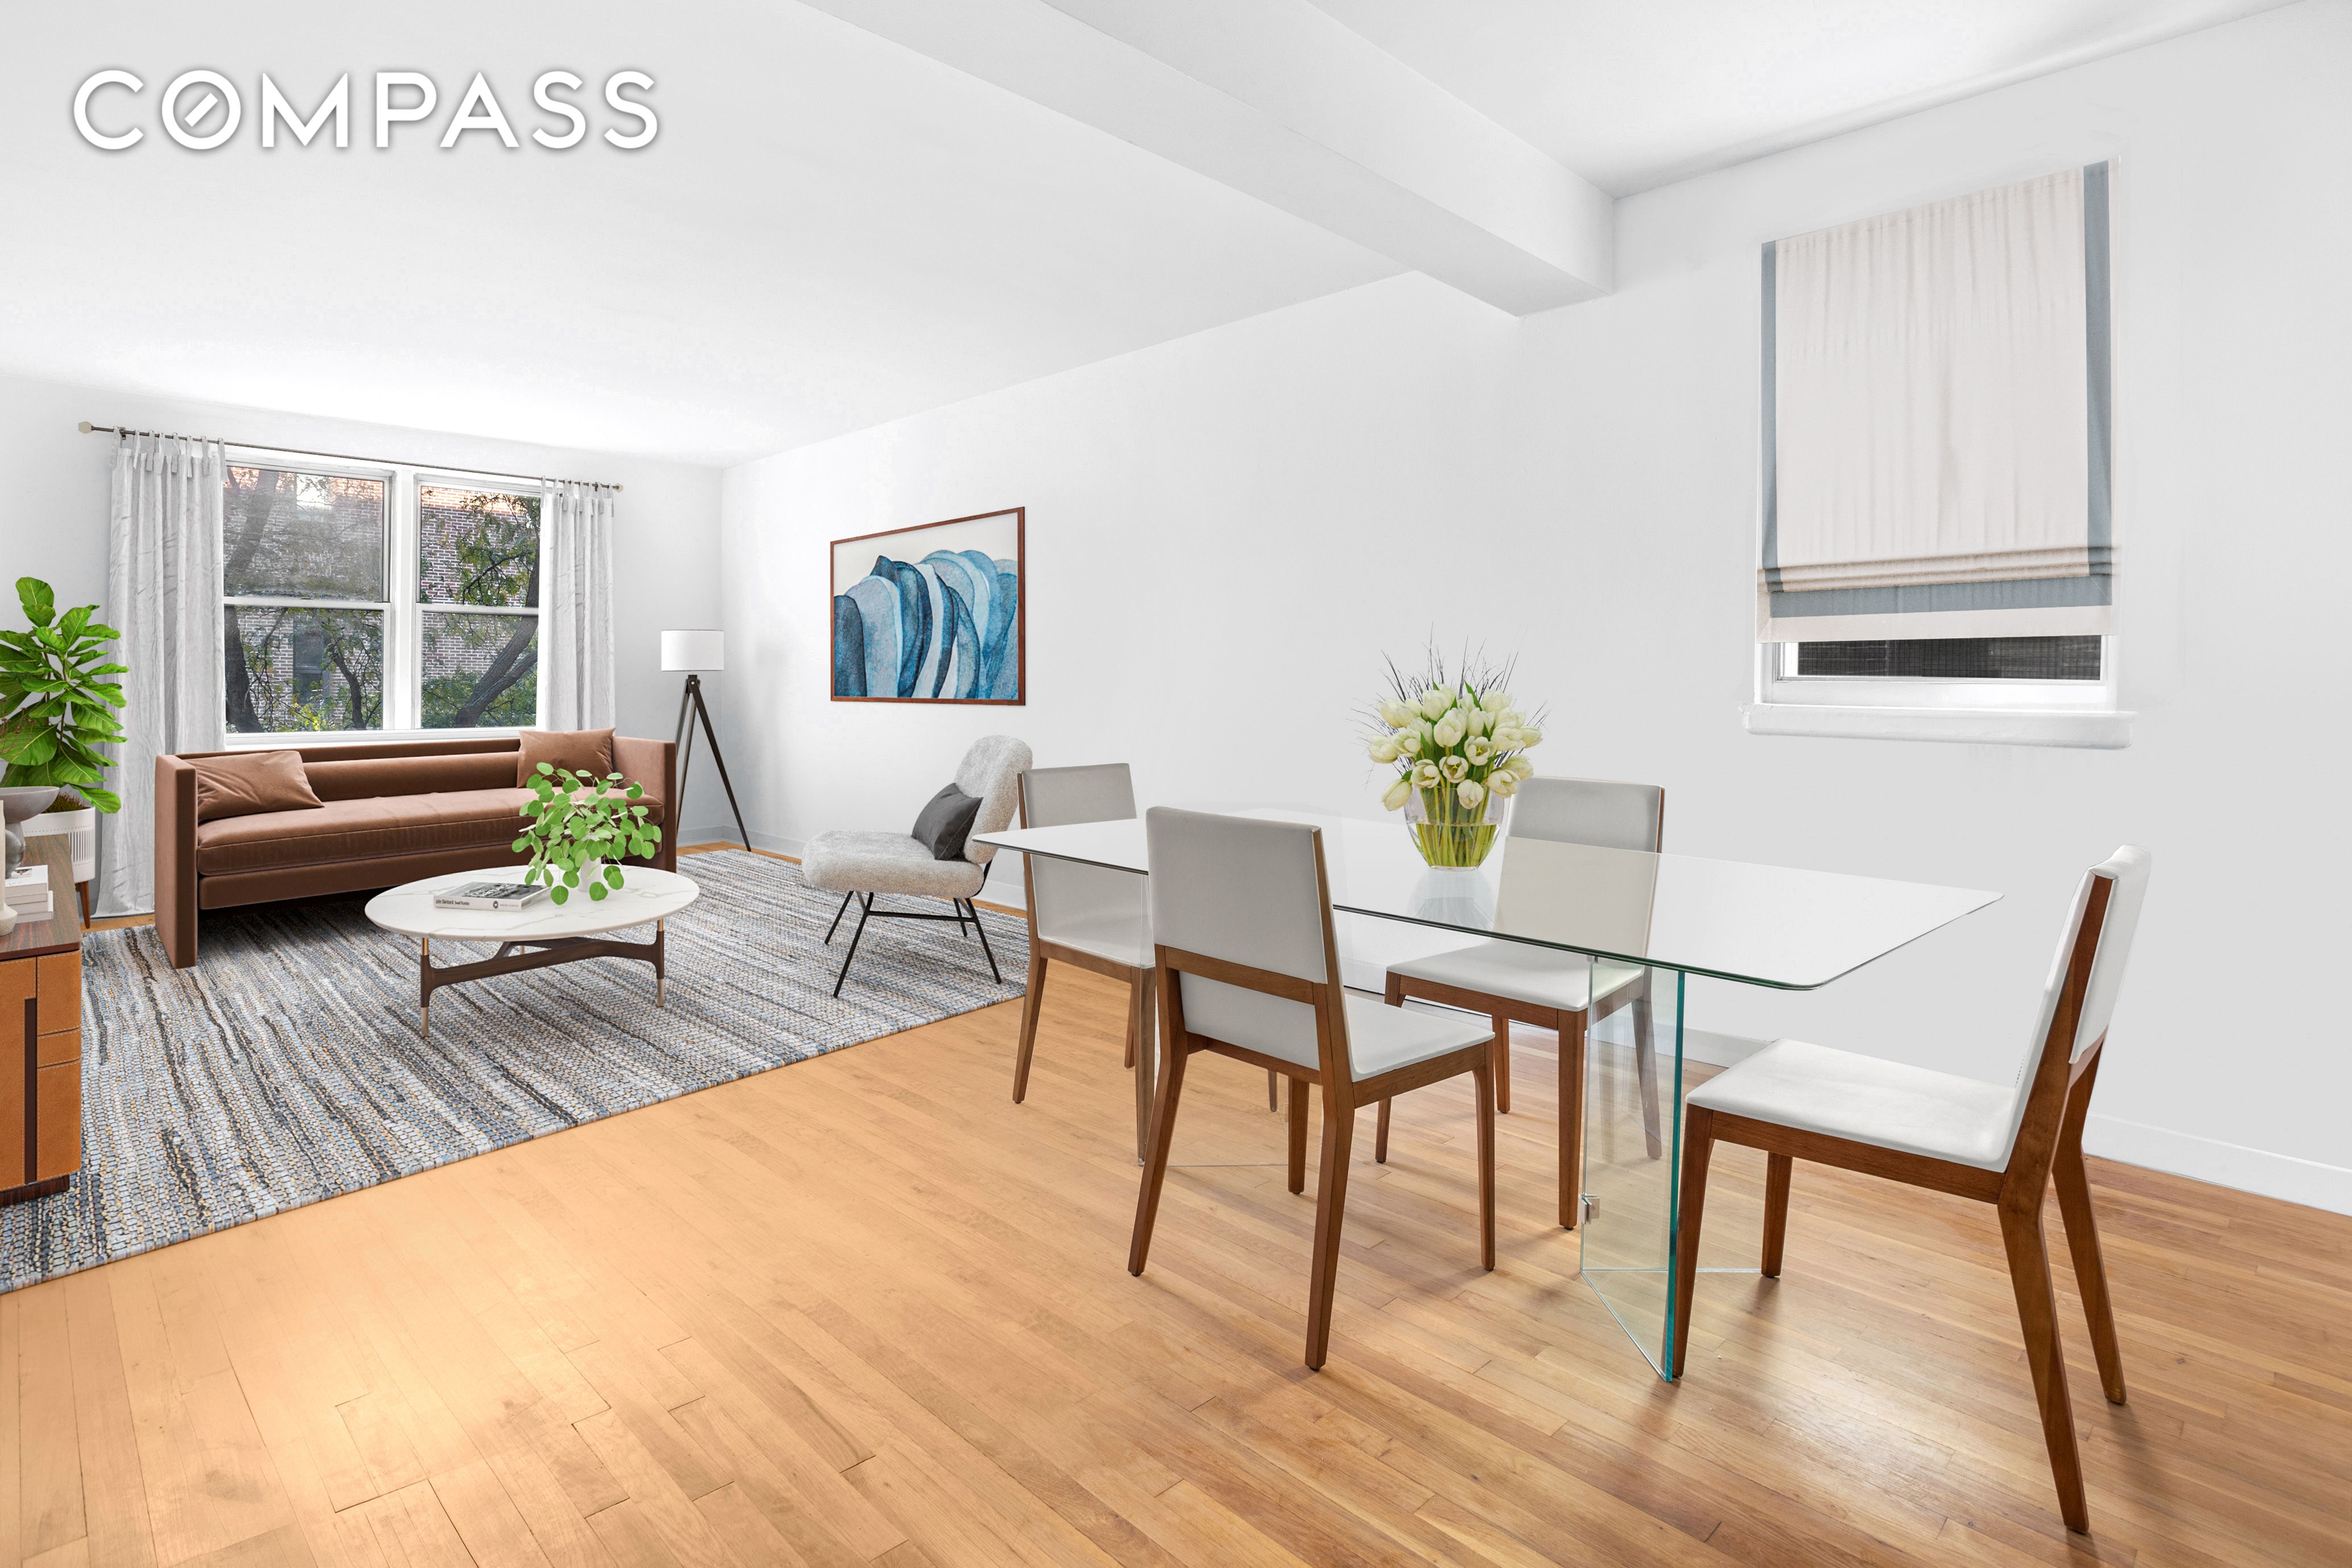 64 East 94th Street 4E, Upper East Side, Upper East Side, NYC - 2 Bedrooms  
2 Bathrooms  
4 Rooms - 